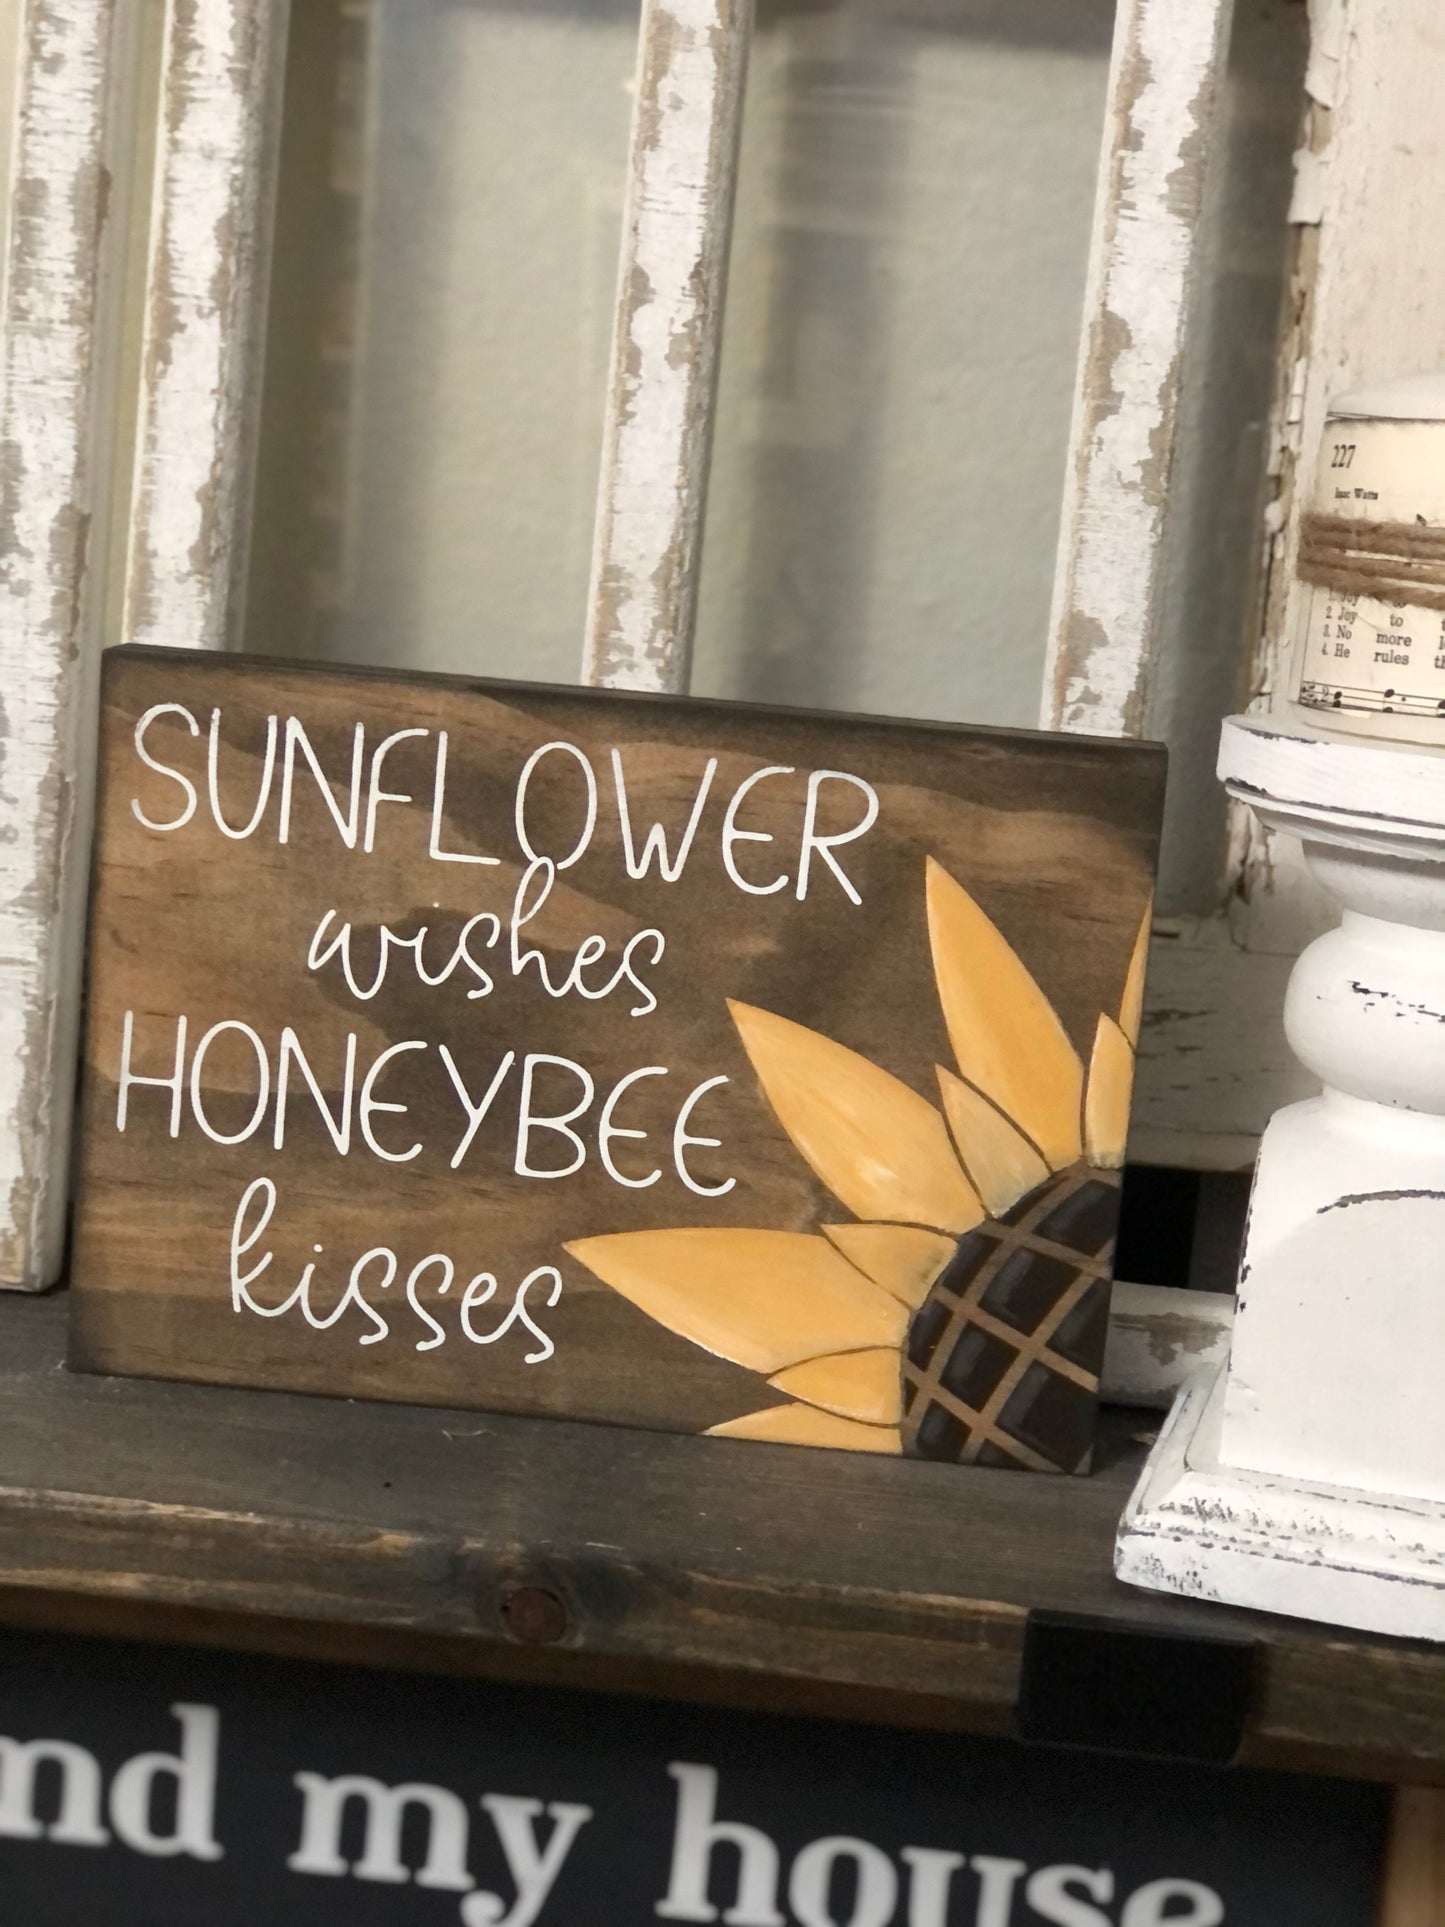 SUNFLOWER WISHES HONEY BEE KISSES  - WOOD SIGN